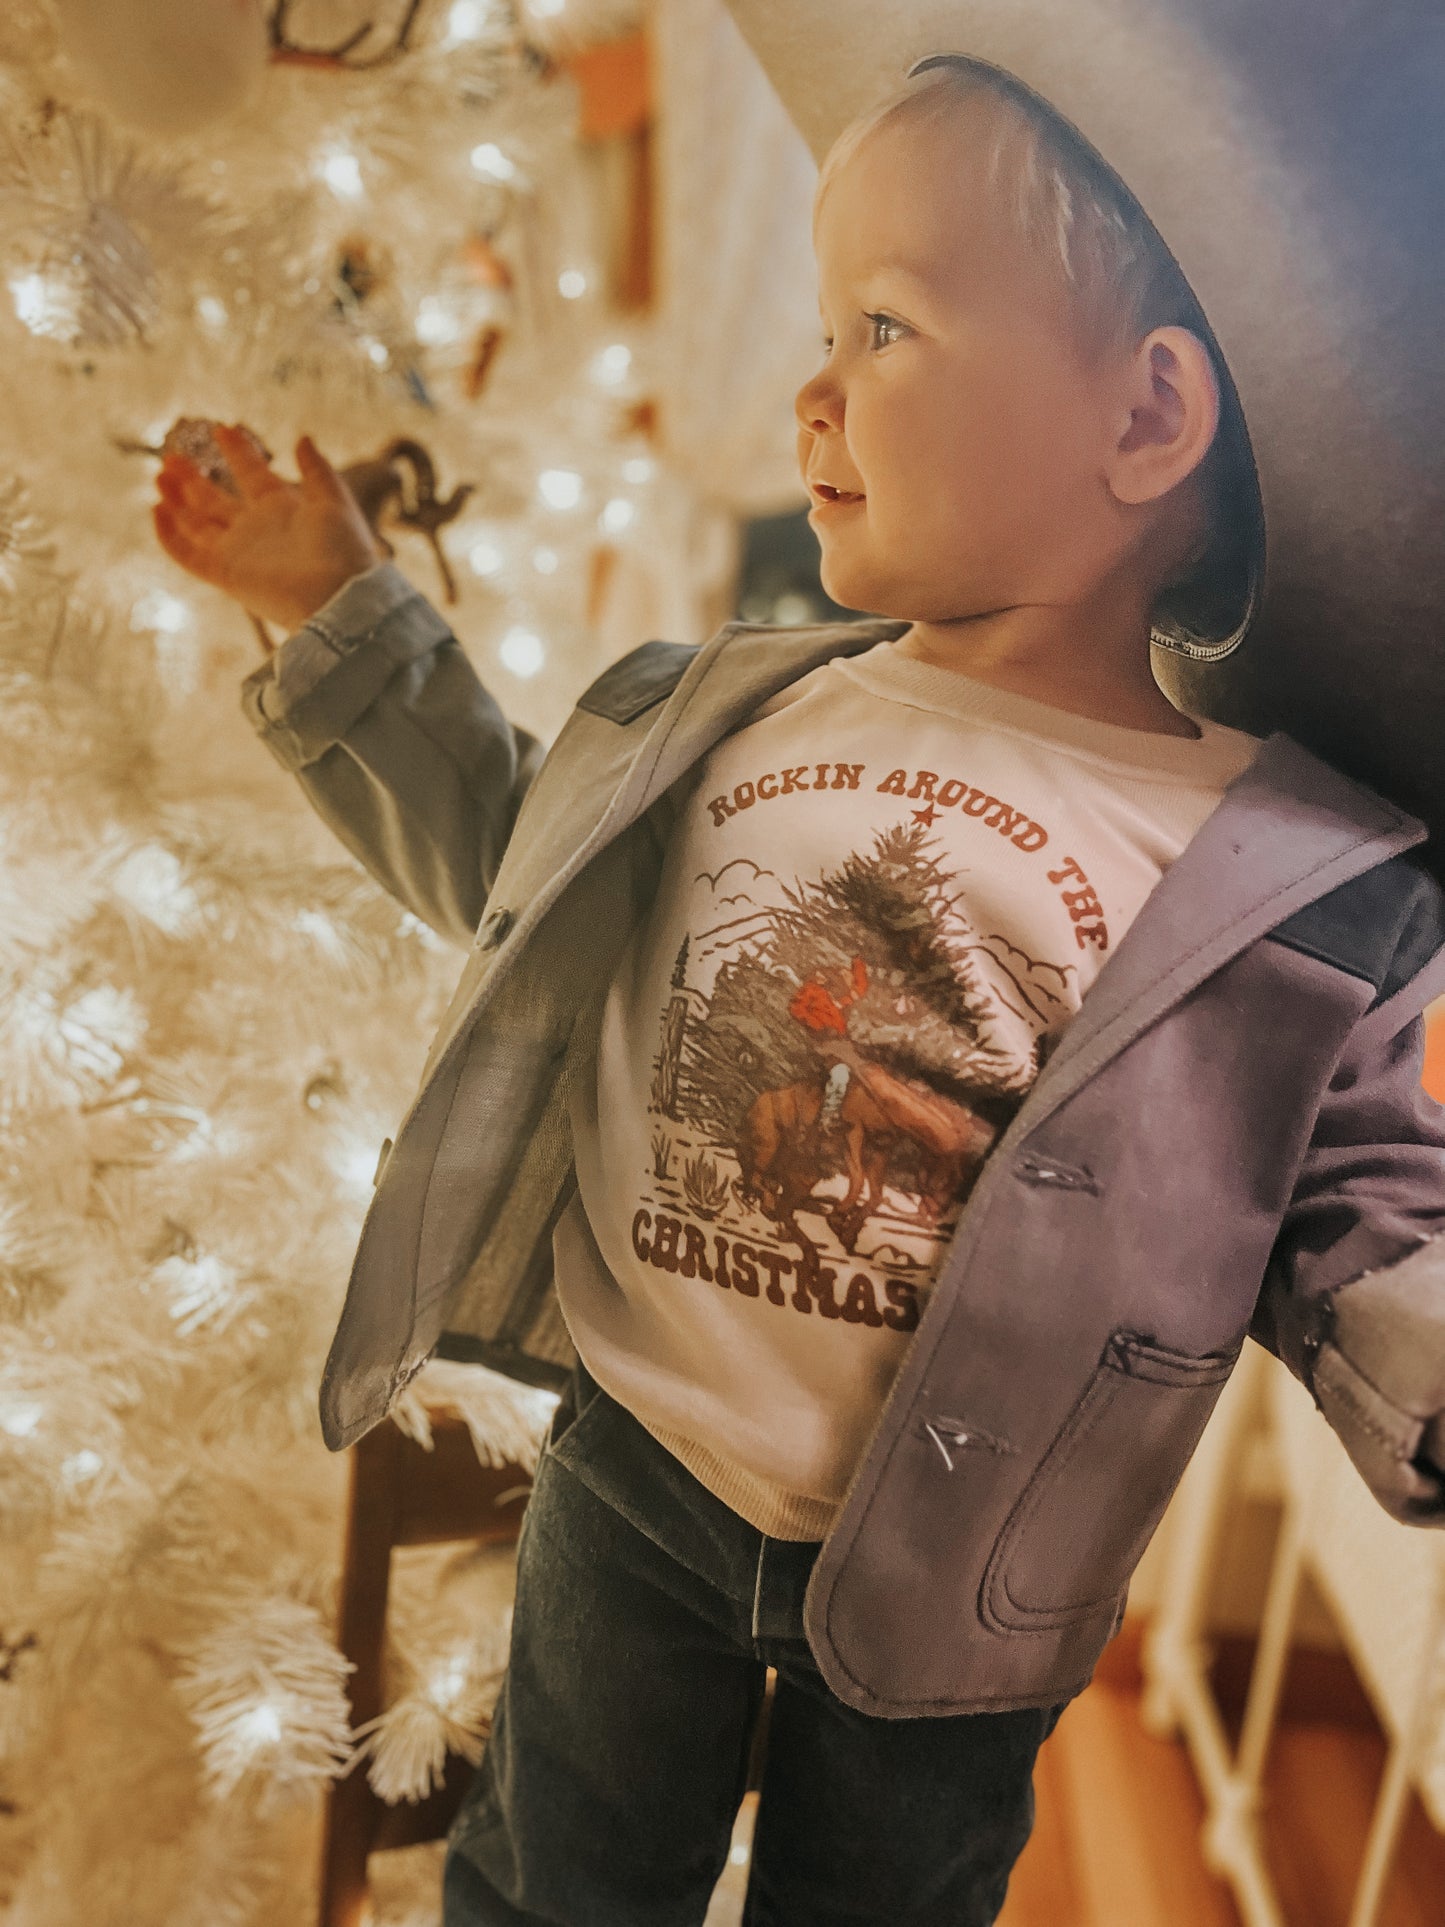 the Rocking around the |Christmas| tree pullover {littles}